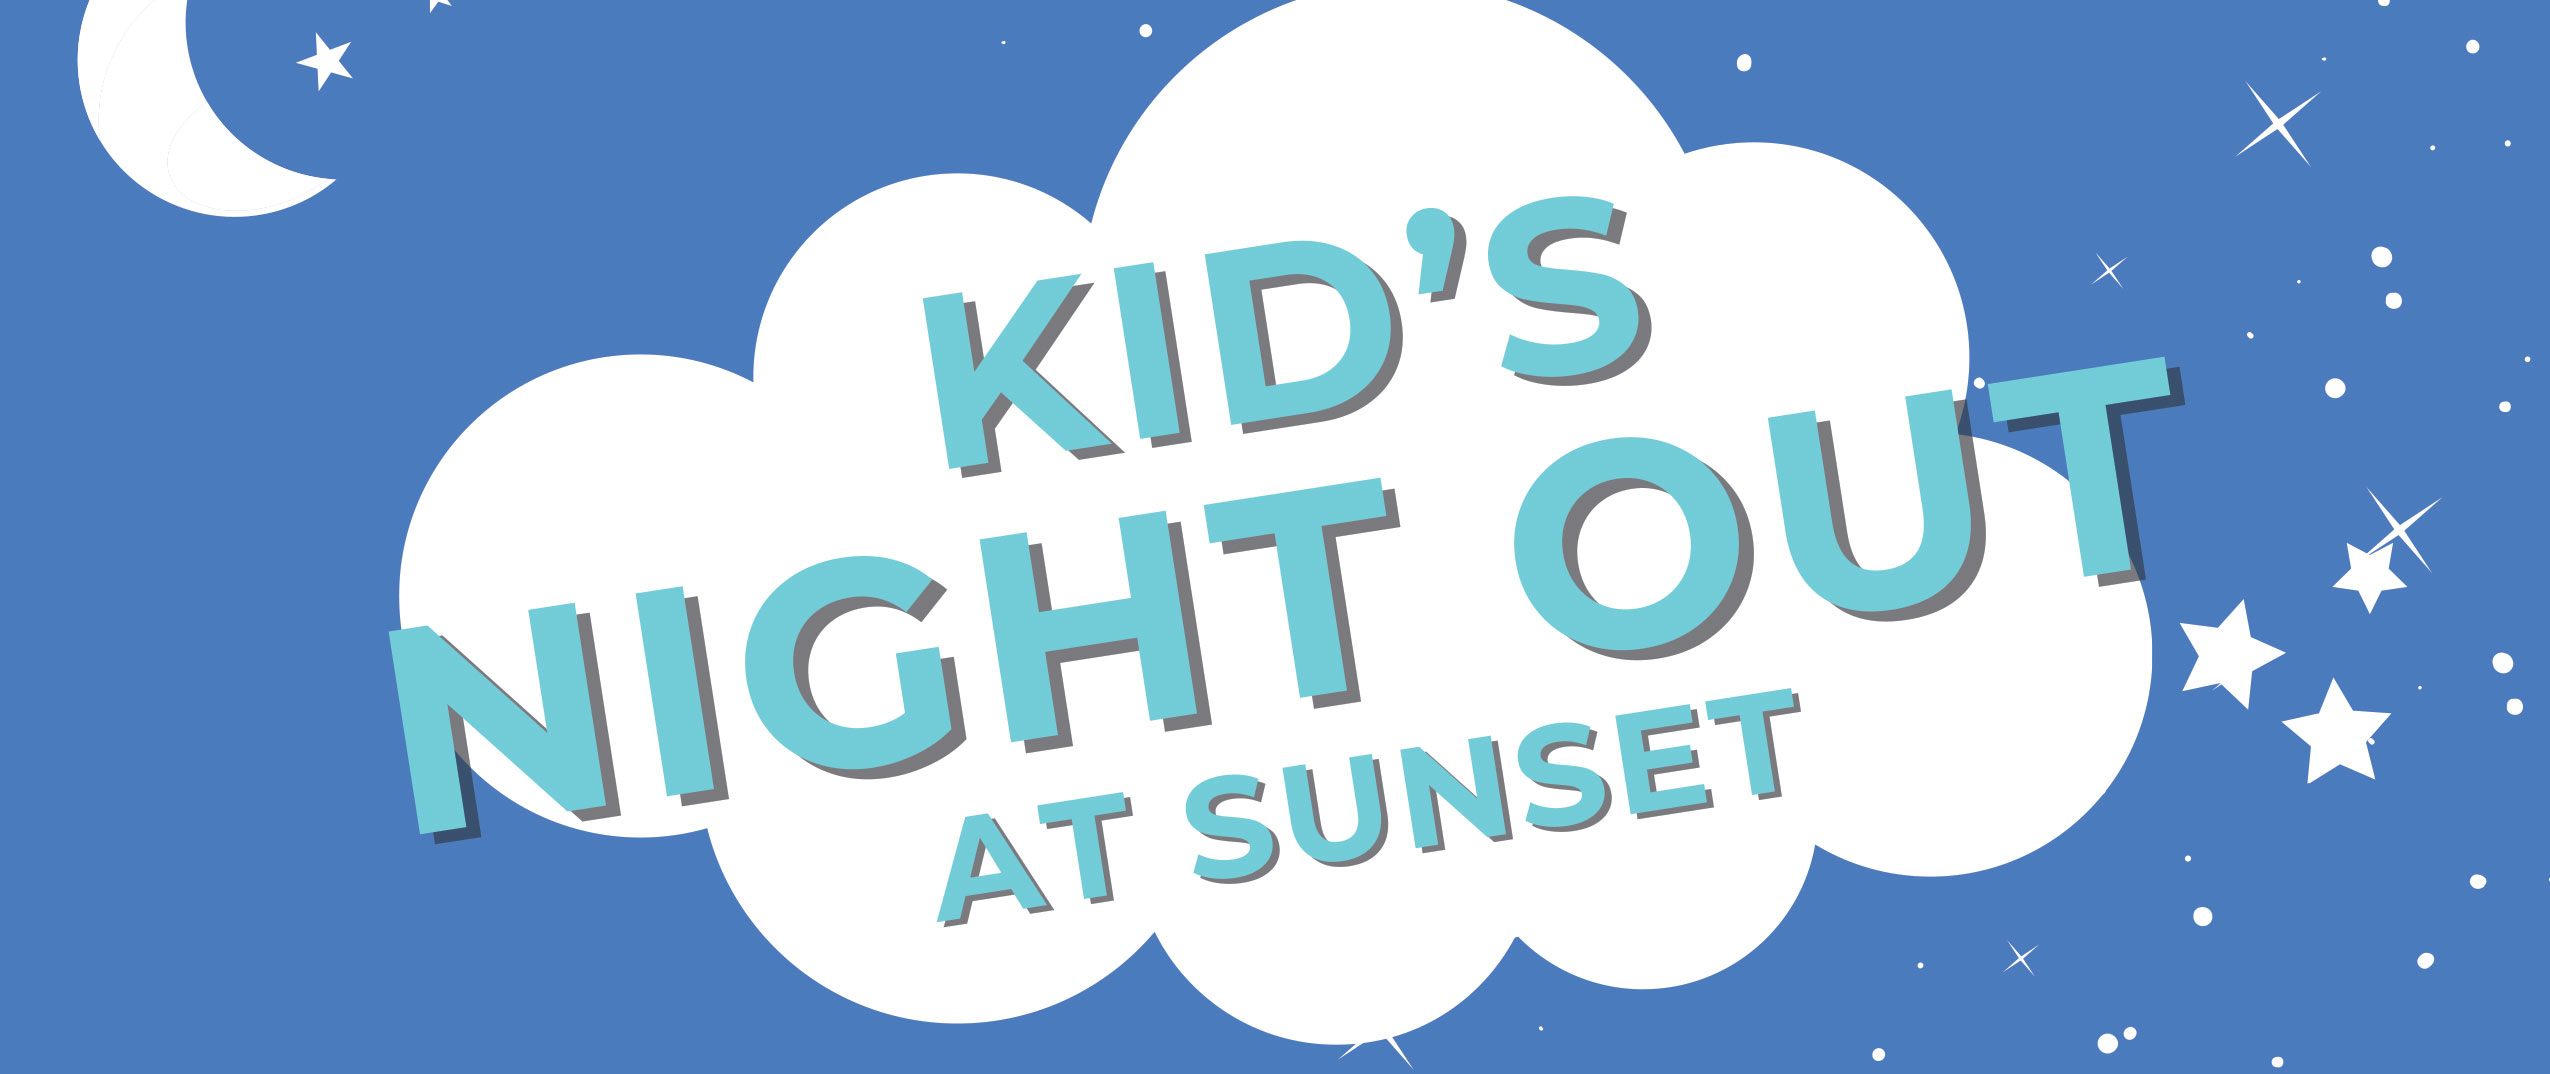 KID’S NIGHT OUTNIGHT OUT AT SUNSETAT SUNSET 5-12 yrs Spend the evening at Sunset Community Centre with a dinner and movie! Movie will be selected by participants on the day of. Other crafts and activities available during movie time. DINNER ACTIVITY:DIY PIZZA Valentine's Day FEBRUARY 14 5:30PM - 8:30PM $25 REGISTER NOW #499650